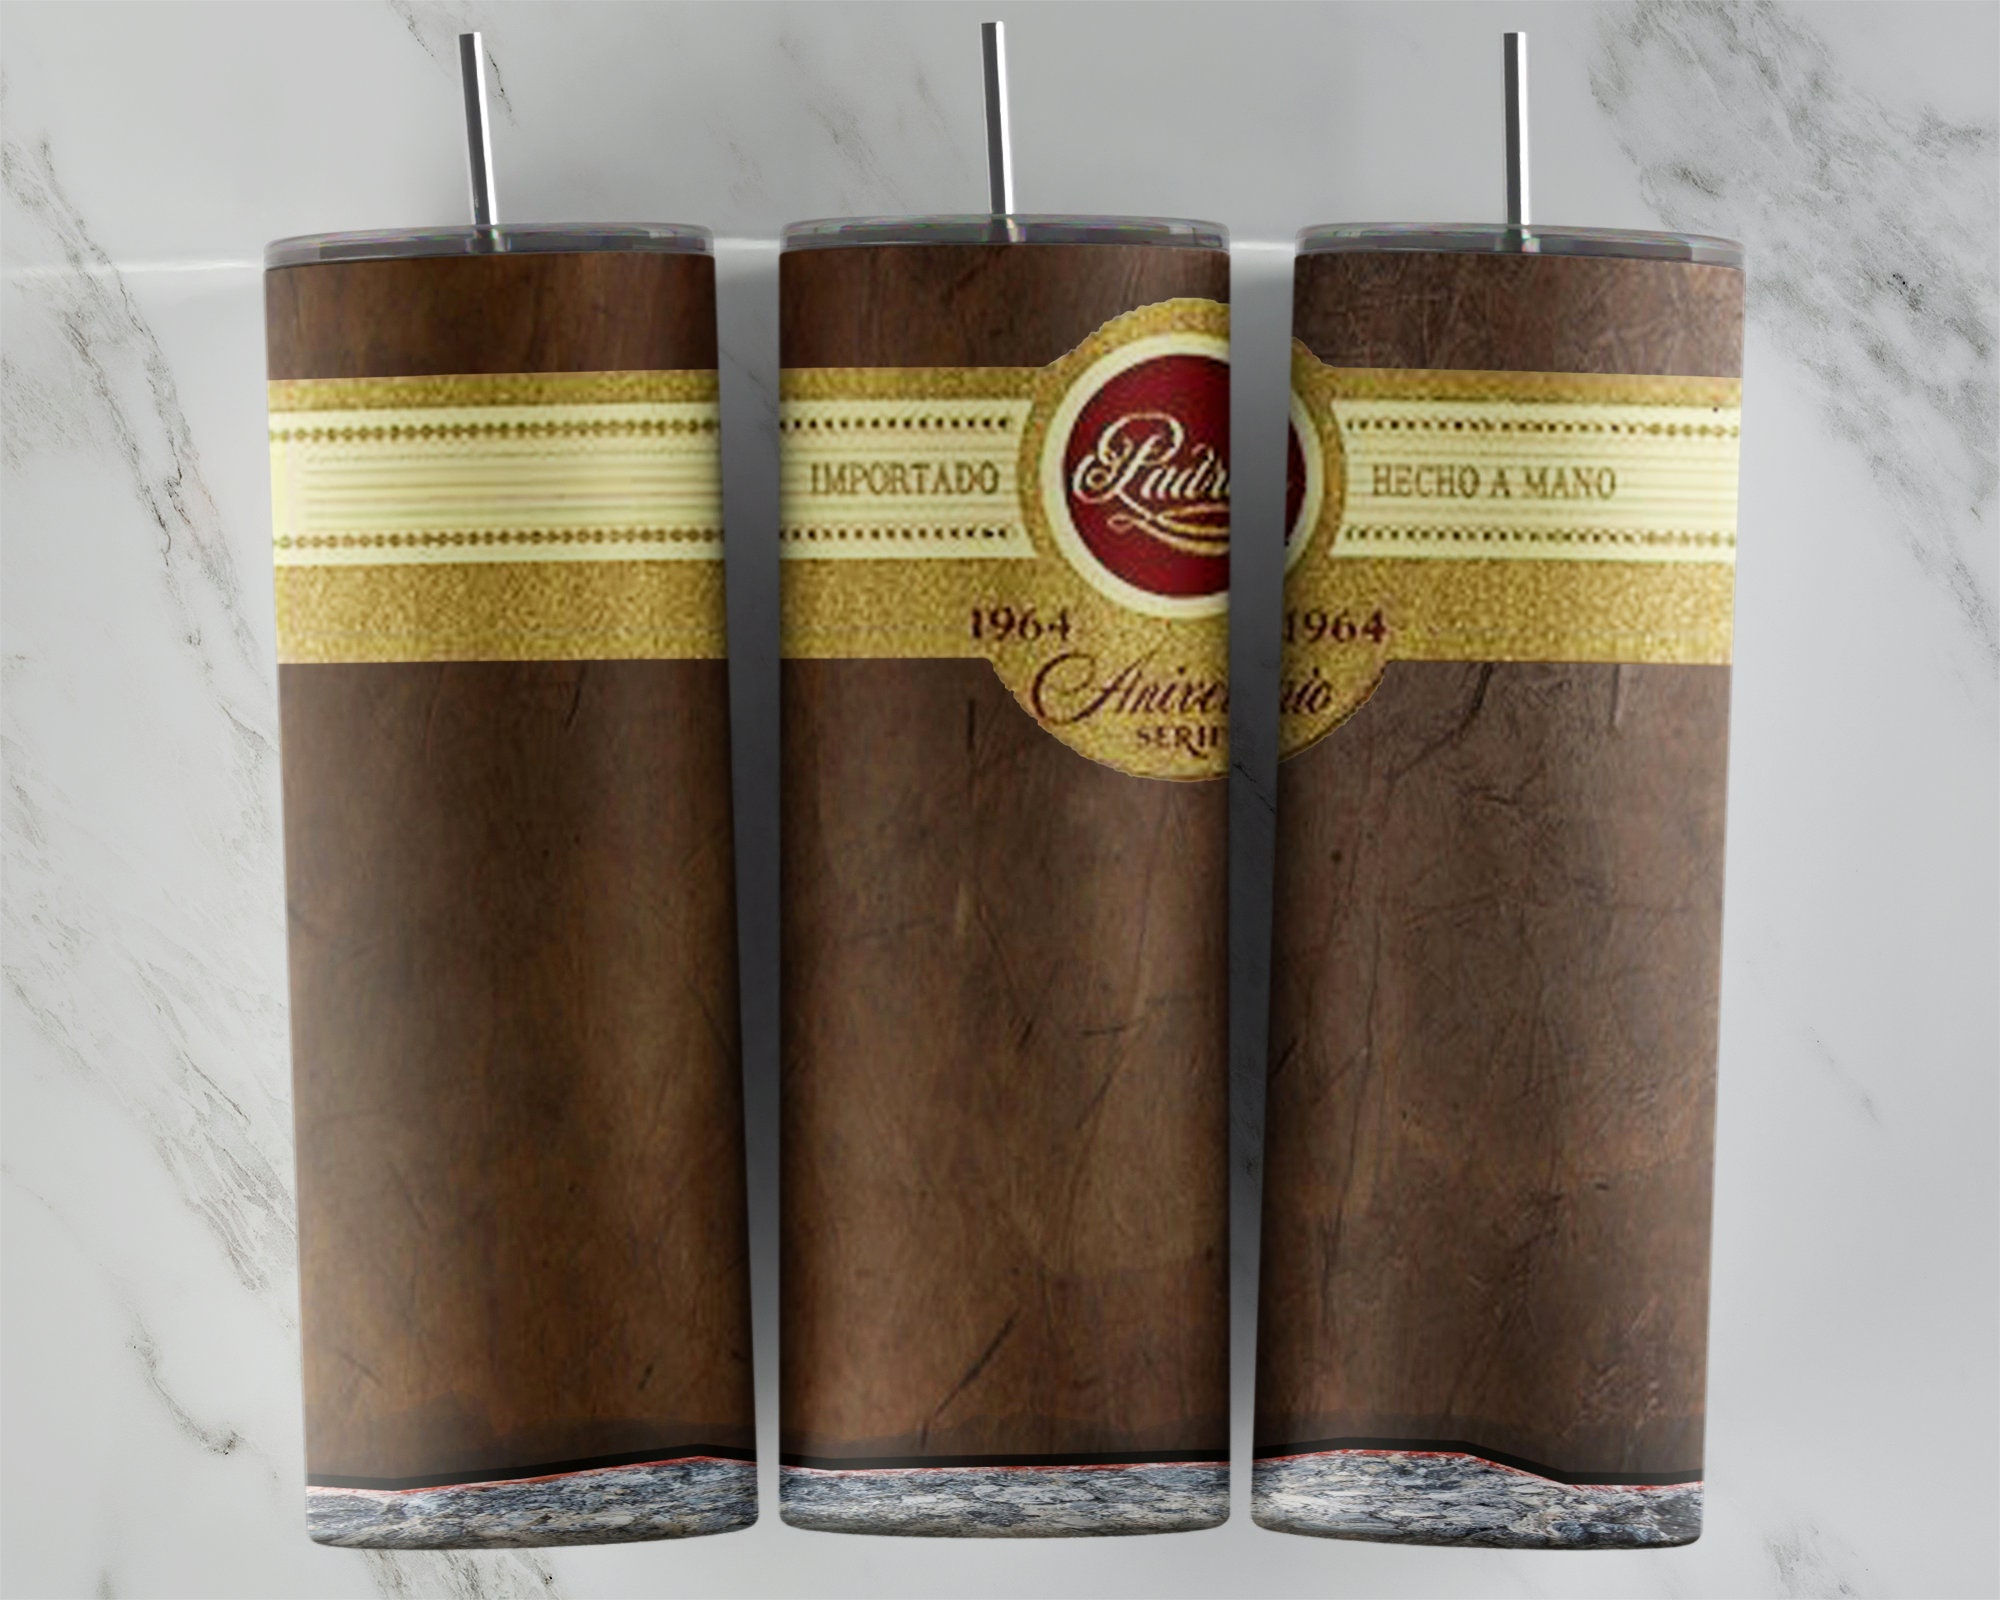 CIGAR TUBE - innovative tumblers, home design (planters) and